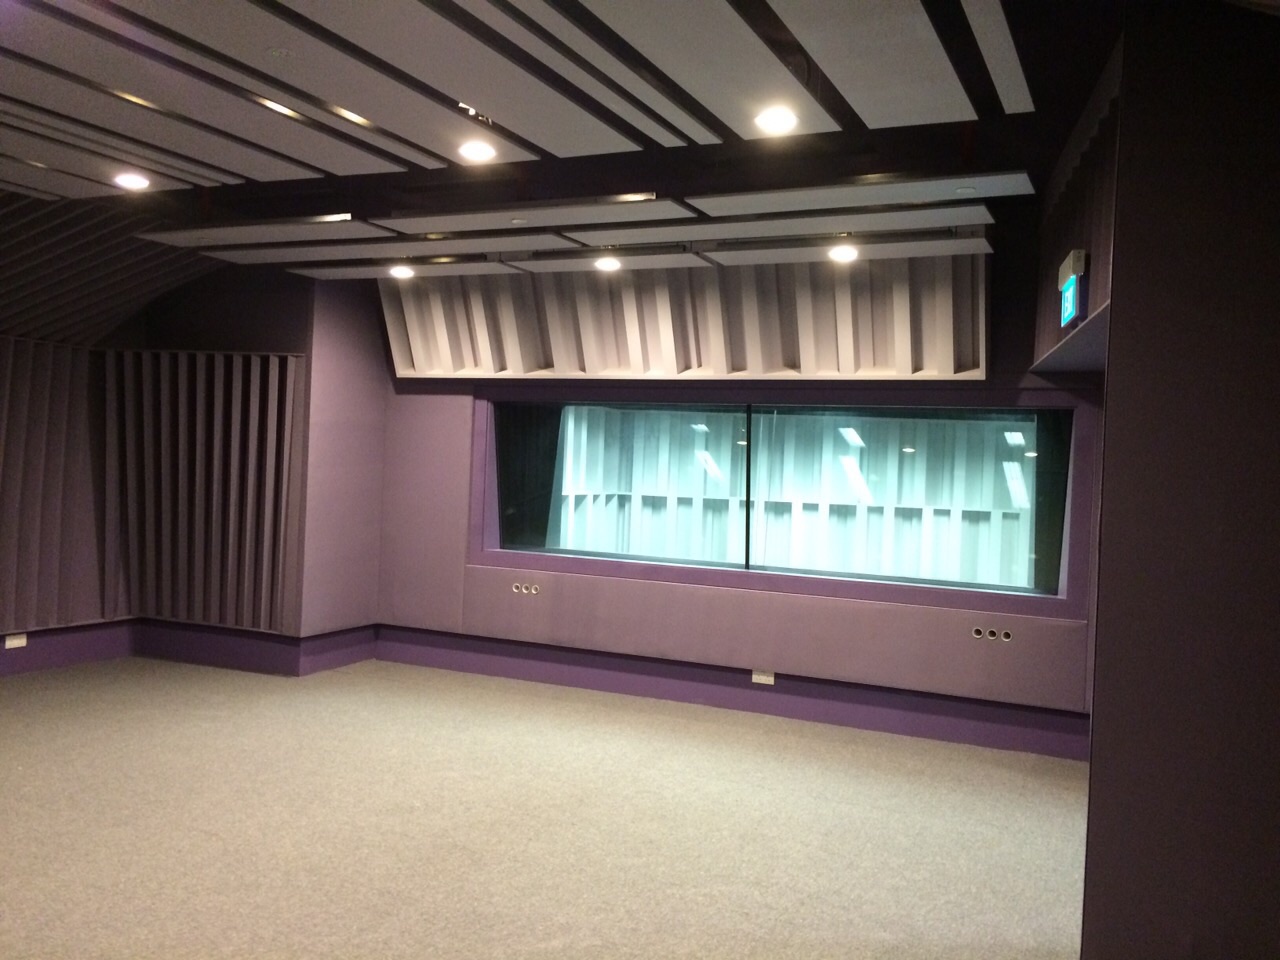 D2-SUTD-3-SoundTrack_acoustic-fabric-panel-system-profile-wall-ceiling-glaze